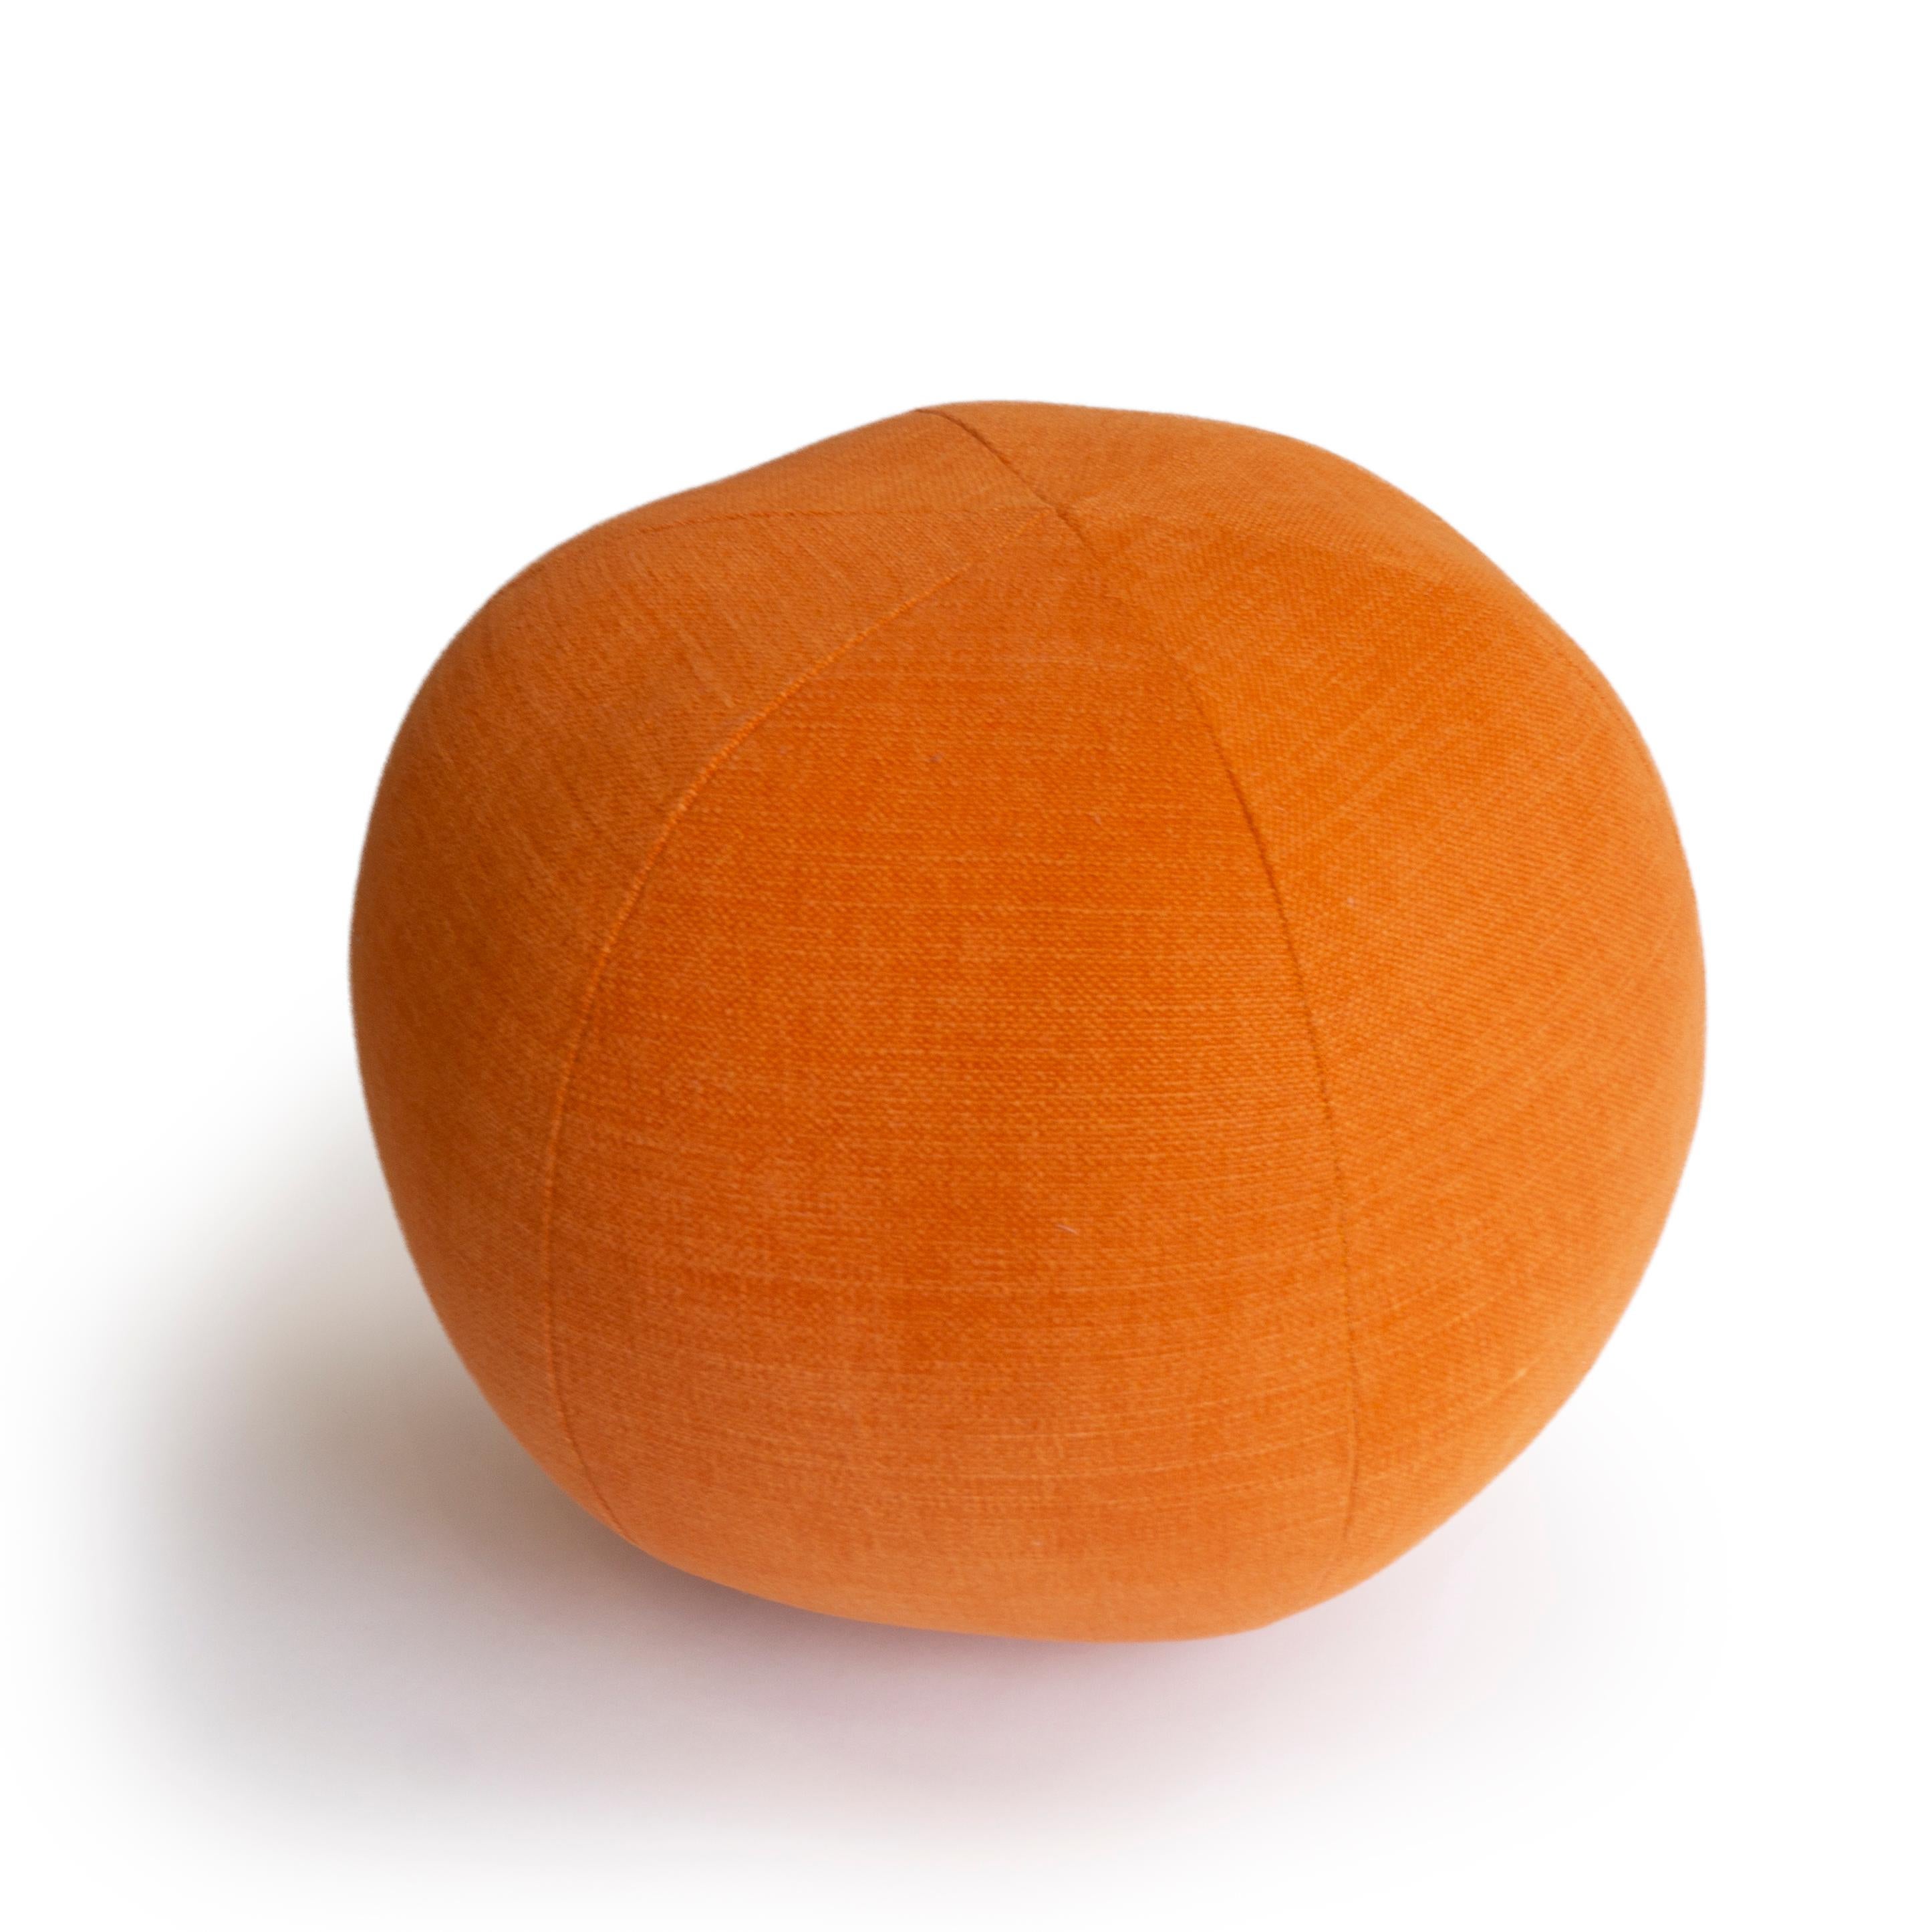 A hand sewn round ball pillow in orange fabric. All pillows are made at our studio in Norwalk, Connecticut. 

Measurements: 9